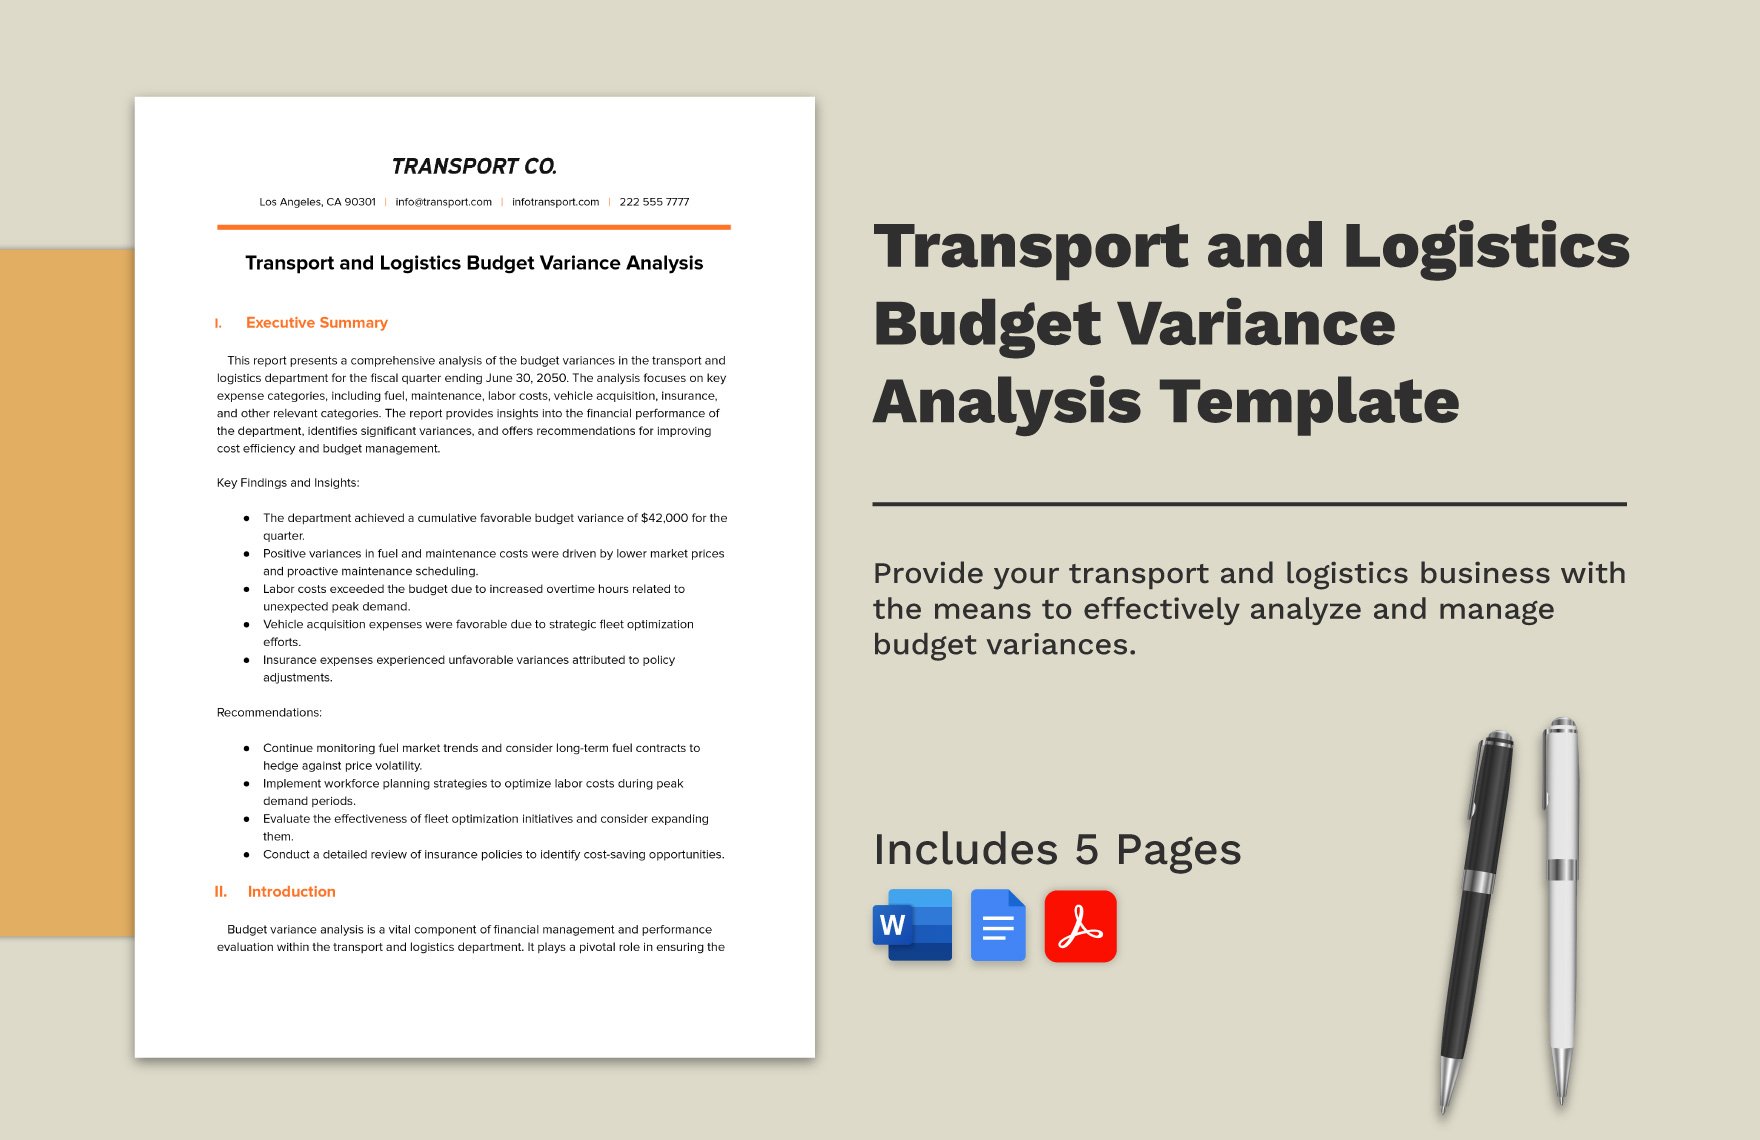 Transport and Logistics Budget Variance Analysis Template in Word, Google Docs, PDF